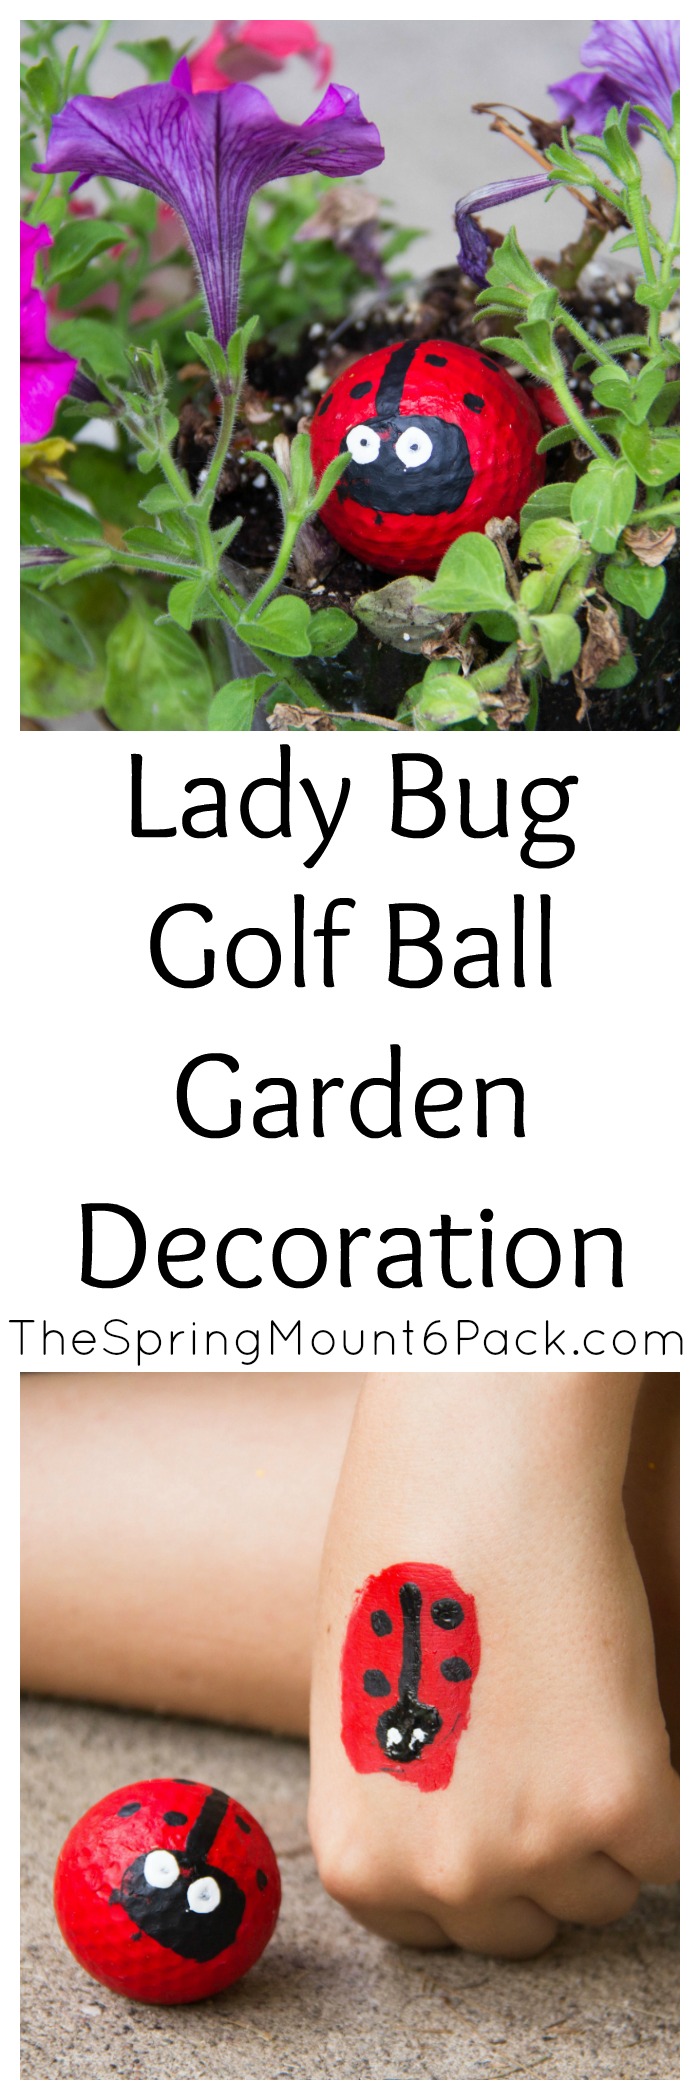 Looking for a fun garden decoration that you can make with the kids? These lady bug golf balls are easy to make and so cute.